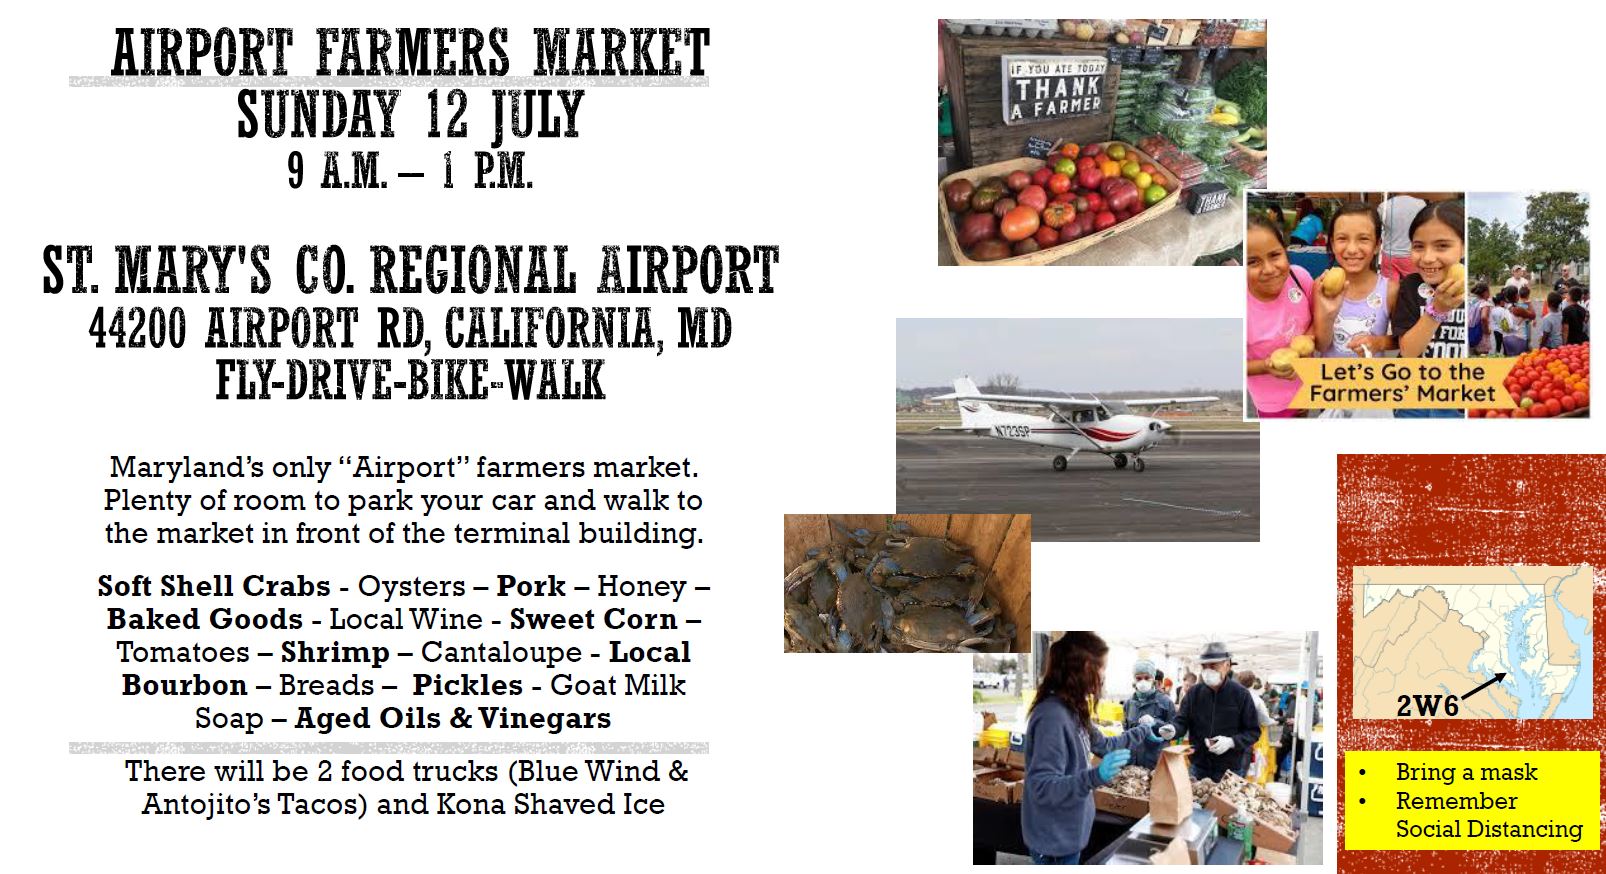 St. Mary’s Airport Farmers Market